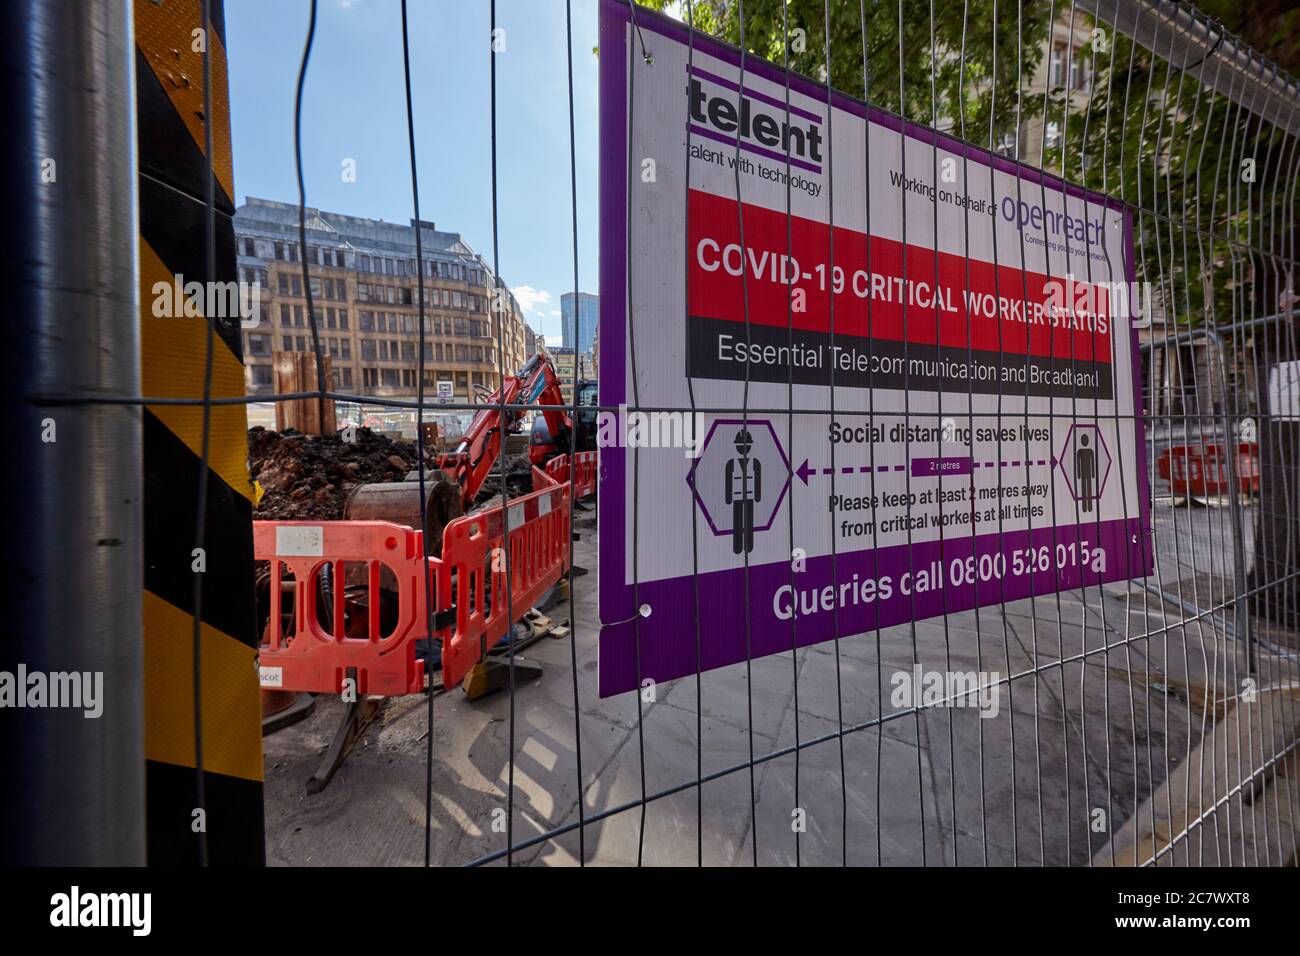 Covid-19 Critical Worker Status sign at Liverpool Street Station construction site. Stock Photo